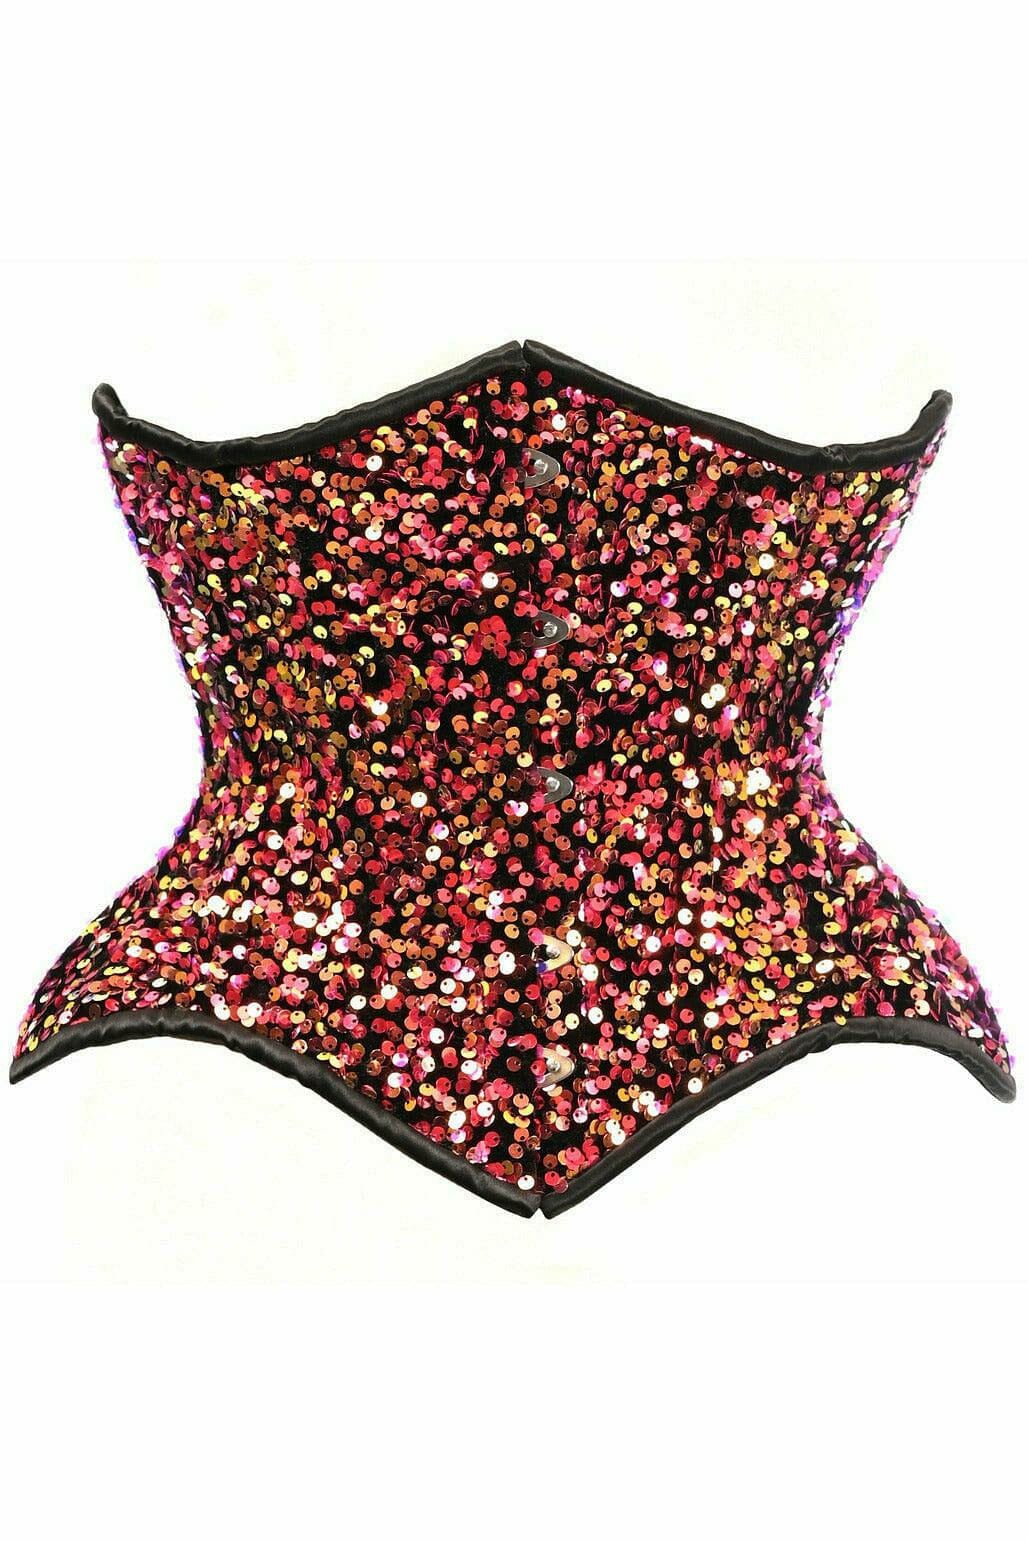 Top Drawer Multi Pink Sequin Curvy Cut Waist Cincher Corset-Waist Cinchers-Daisy Corsets-Pink-S-SEXYSHOES.COM